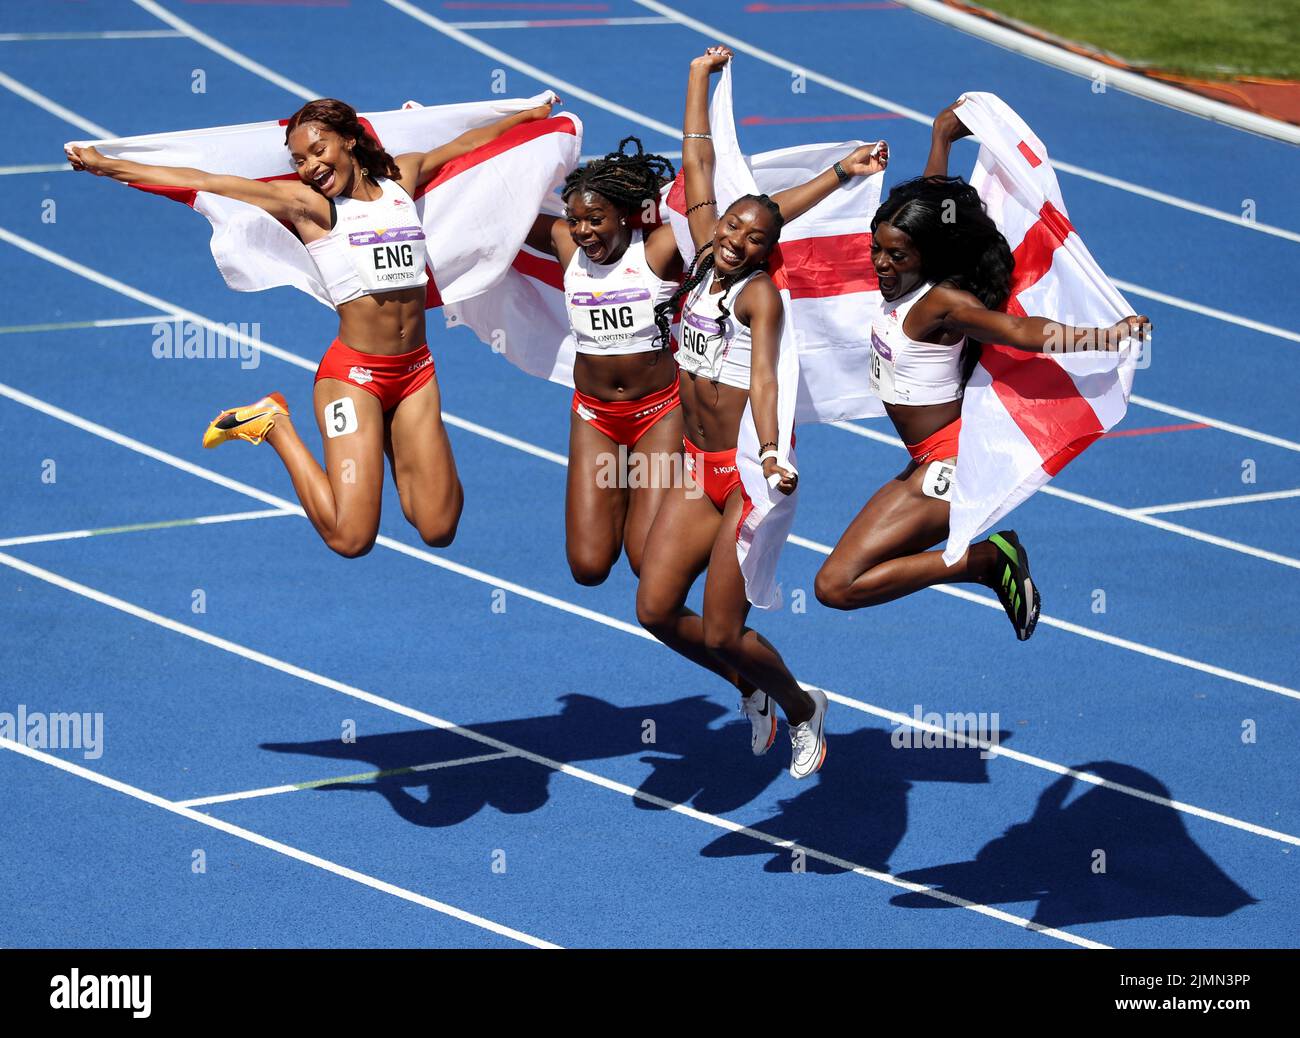 Birmingham, UK. 7th Aug, 2022. The England Women's 4x100m relay team pose for a photo after they win silver during Day 10 of the Commonwealth Games at Alexander Stadium, Birmingham. Picture credit should read: Paul Terry Credit: Paul Terry Photo/Alamy Live News Stock Photo